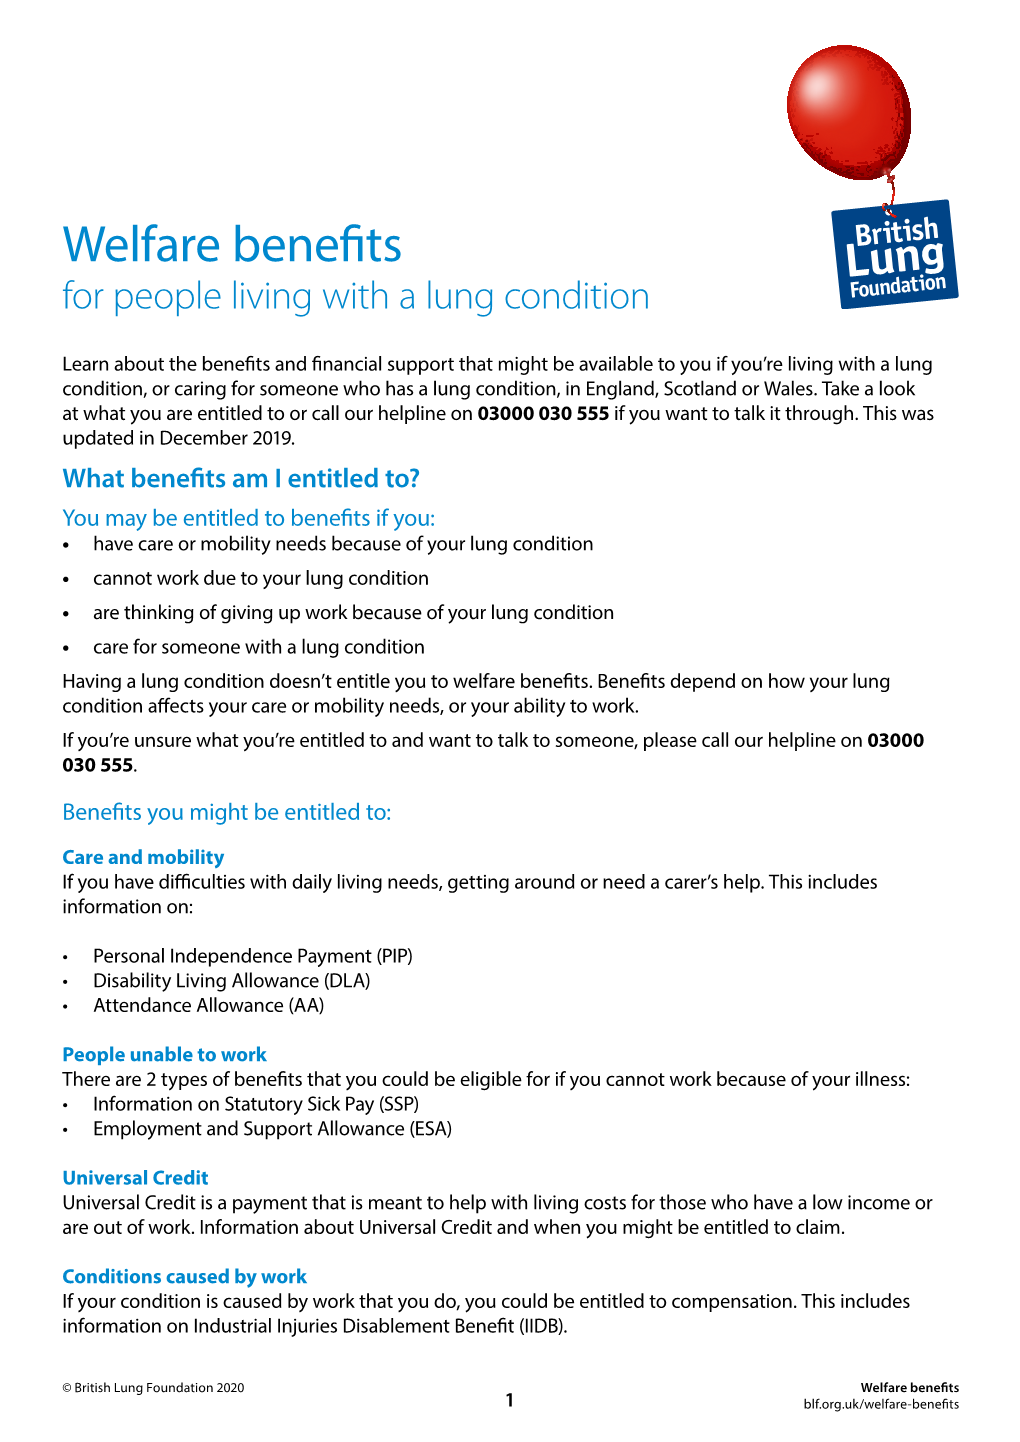 Welfare Benefits for People Living with a Lung Condition